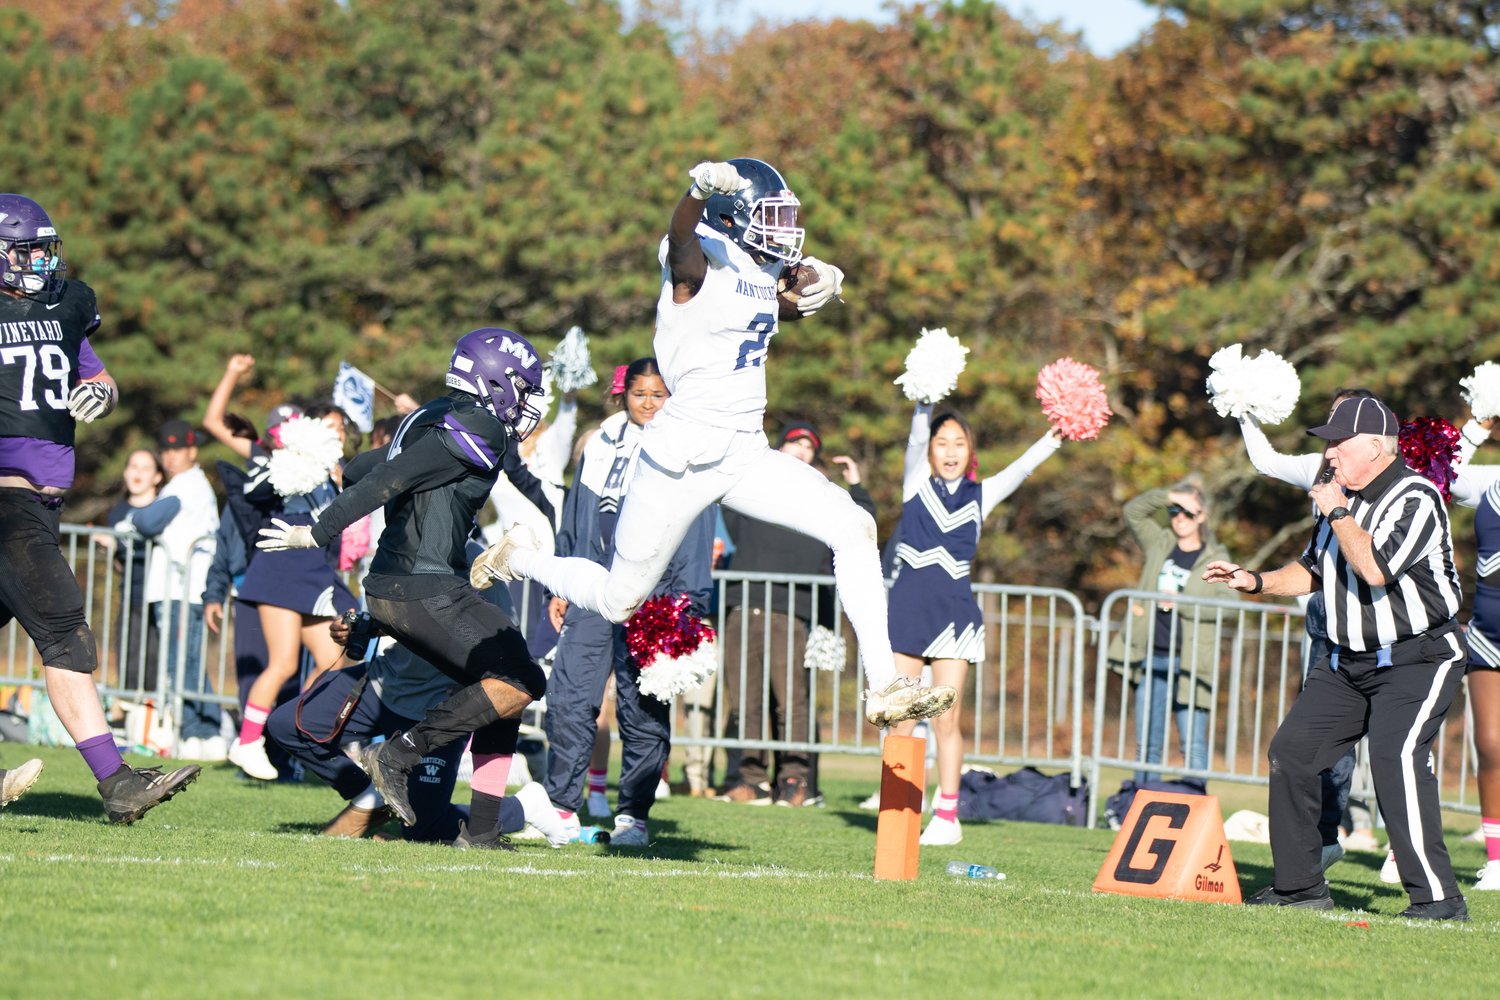 Running back Jayquan Francis leaps into the end zone during Saturday's Island Cup on Martha's Vineyard. The junior scored on a 19-yard touchdown run during the Whalers' 14-13 loss.